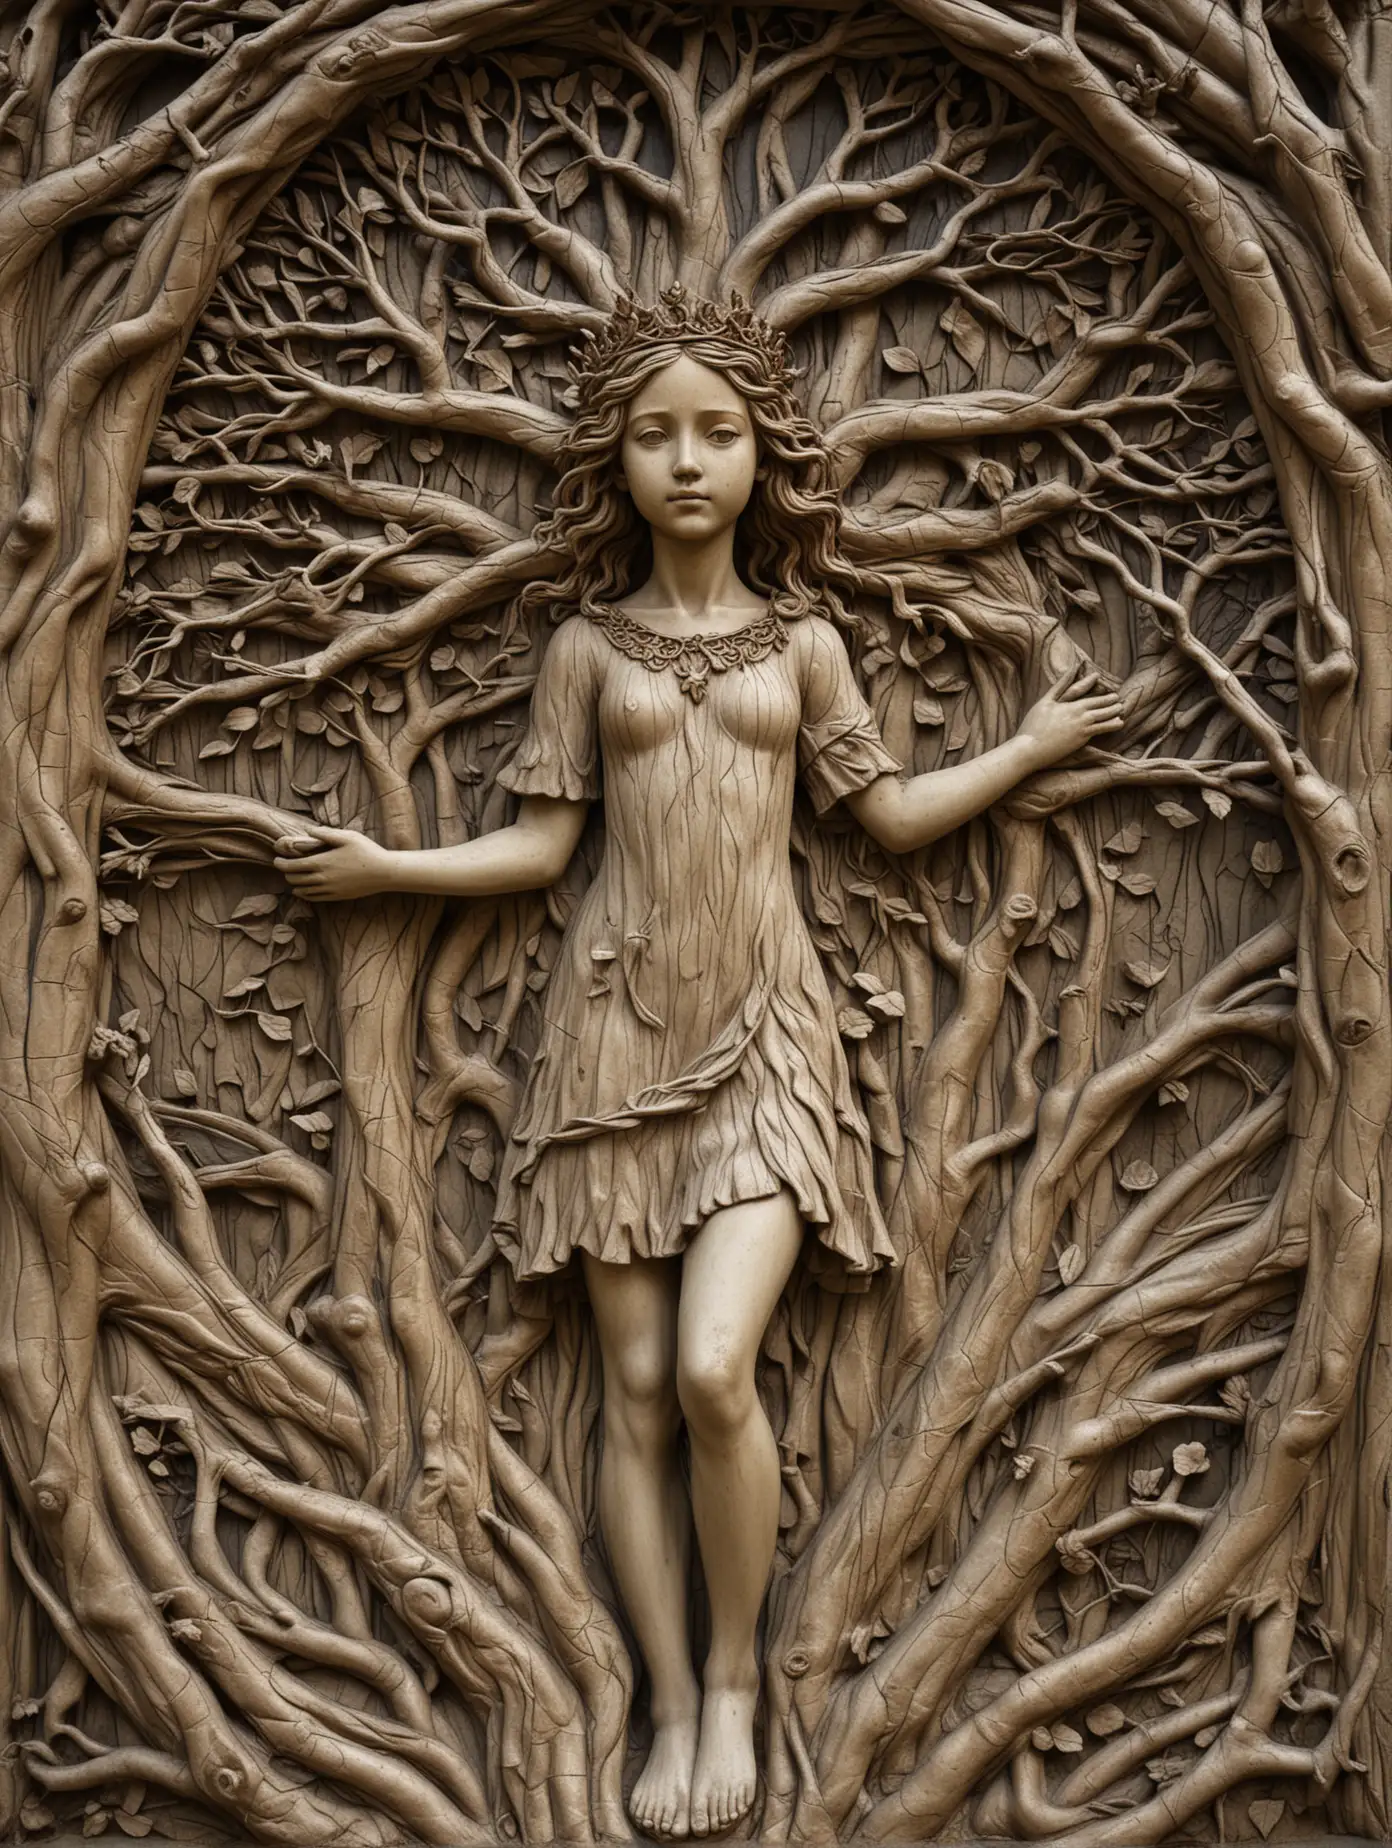 Girl-Crowned-by-Intertwining-Tree-Branches-in-BasRelief-Art